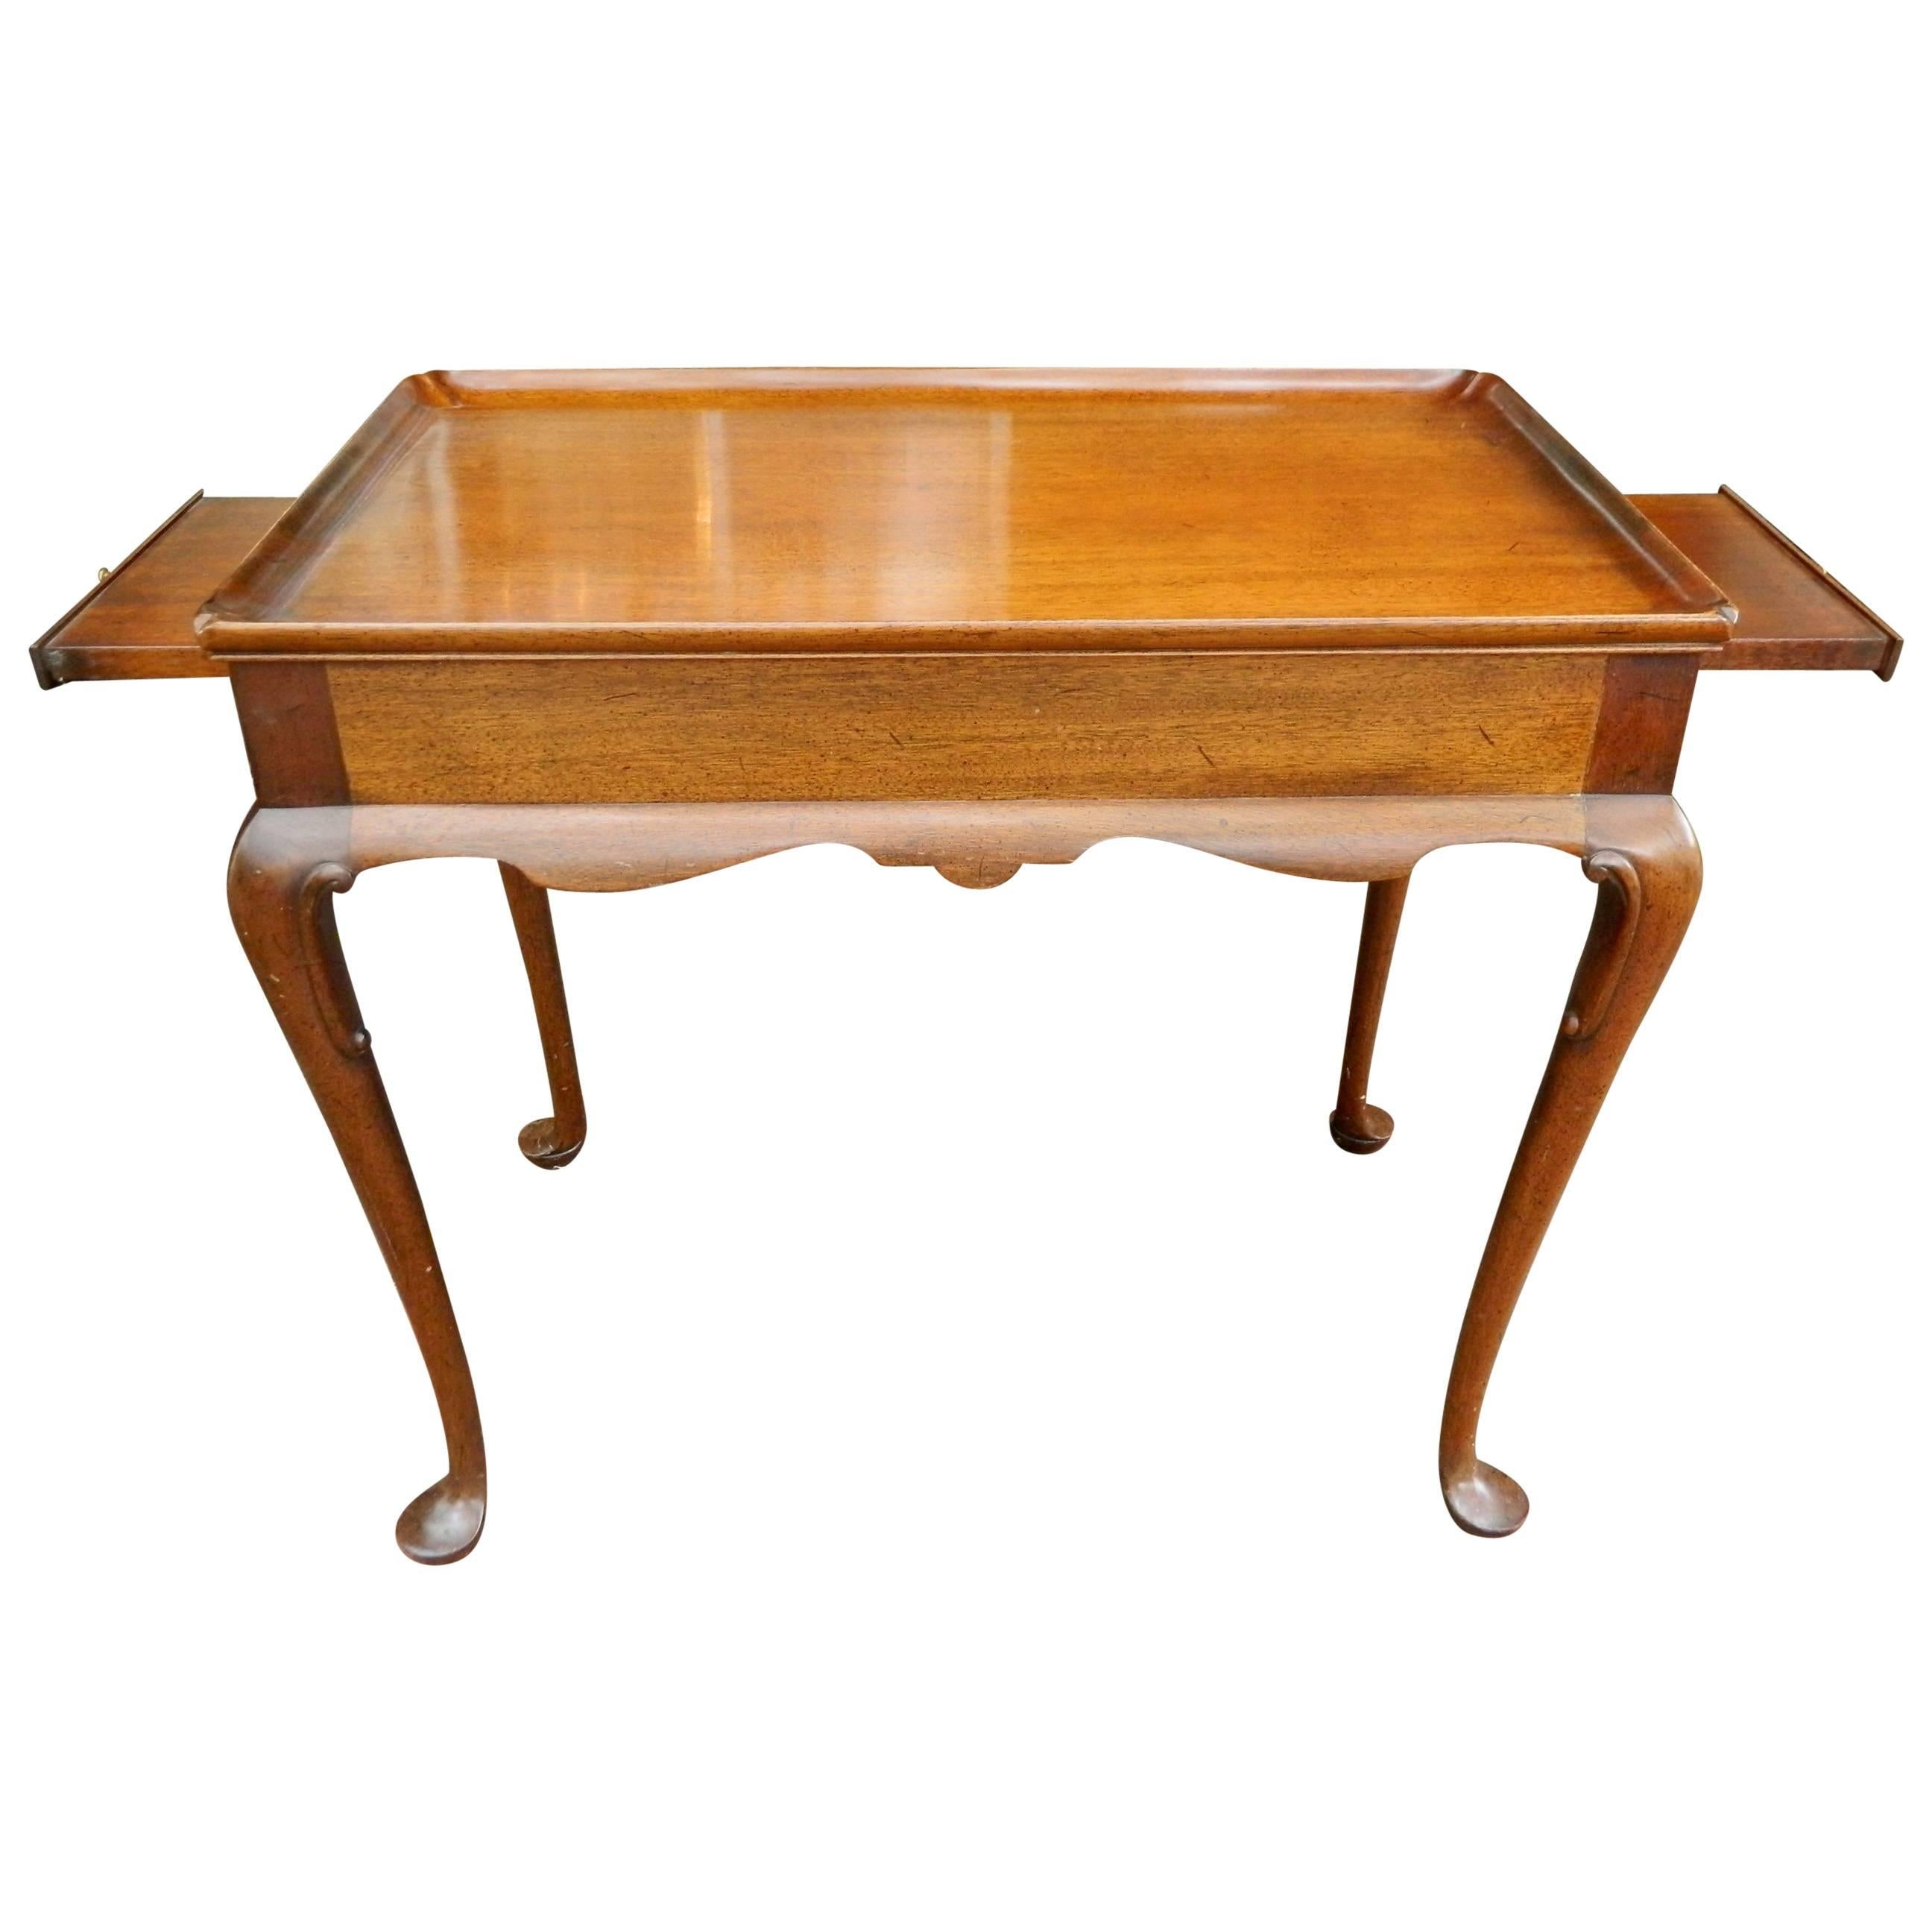 English Mahogany Queen Anne Tray Top Tea Table, Early 19th Century